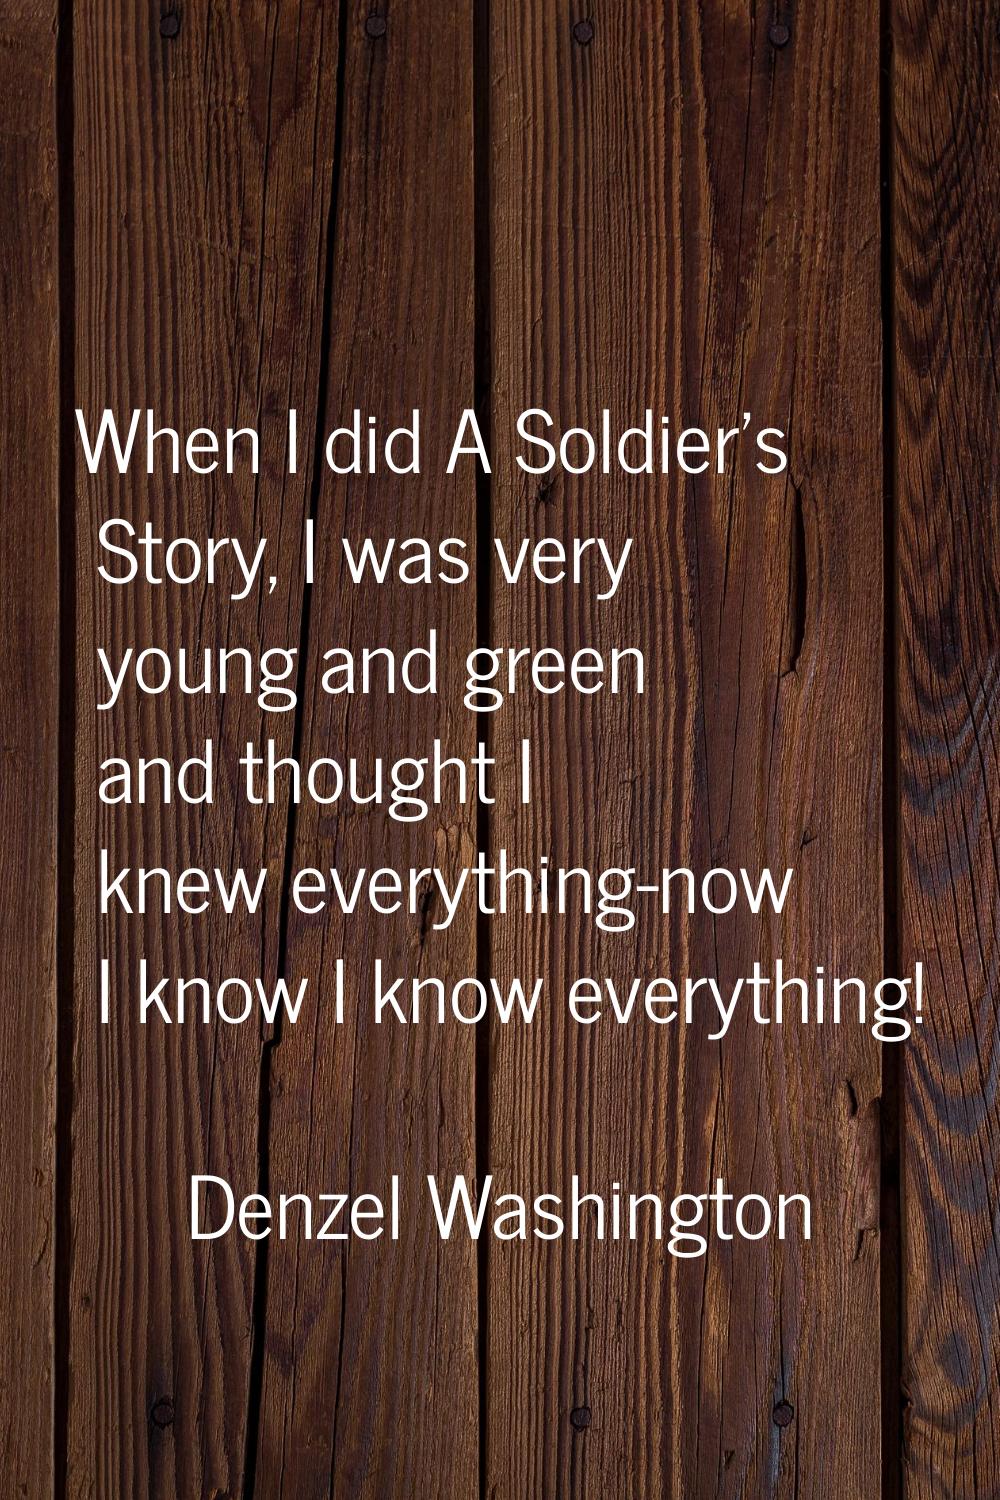 When I did A Soldier's Story, I was very young and green and thought I knew everything-now I know I